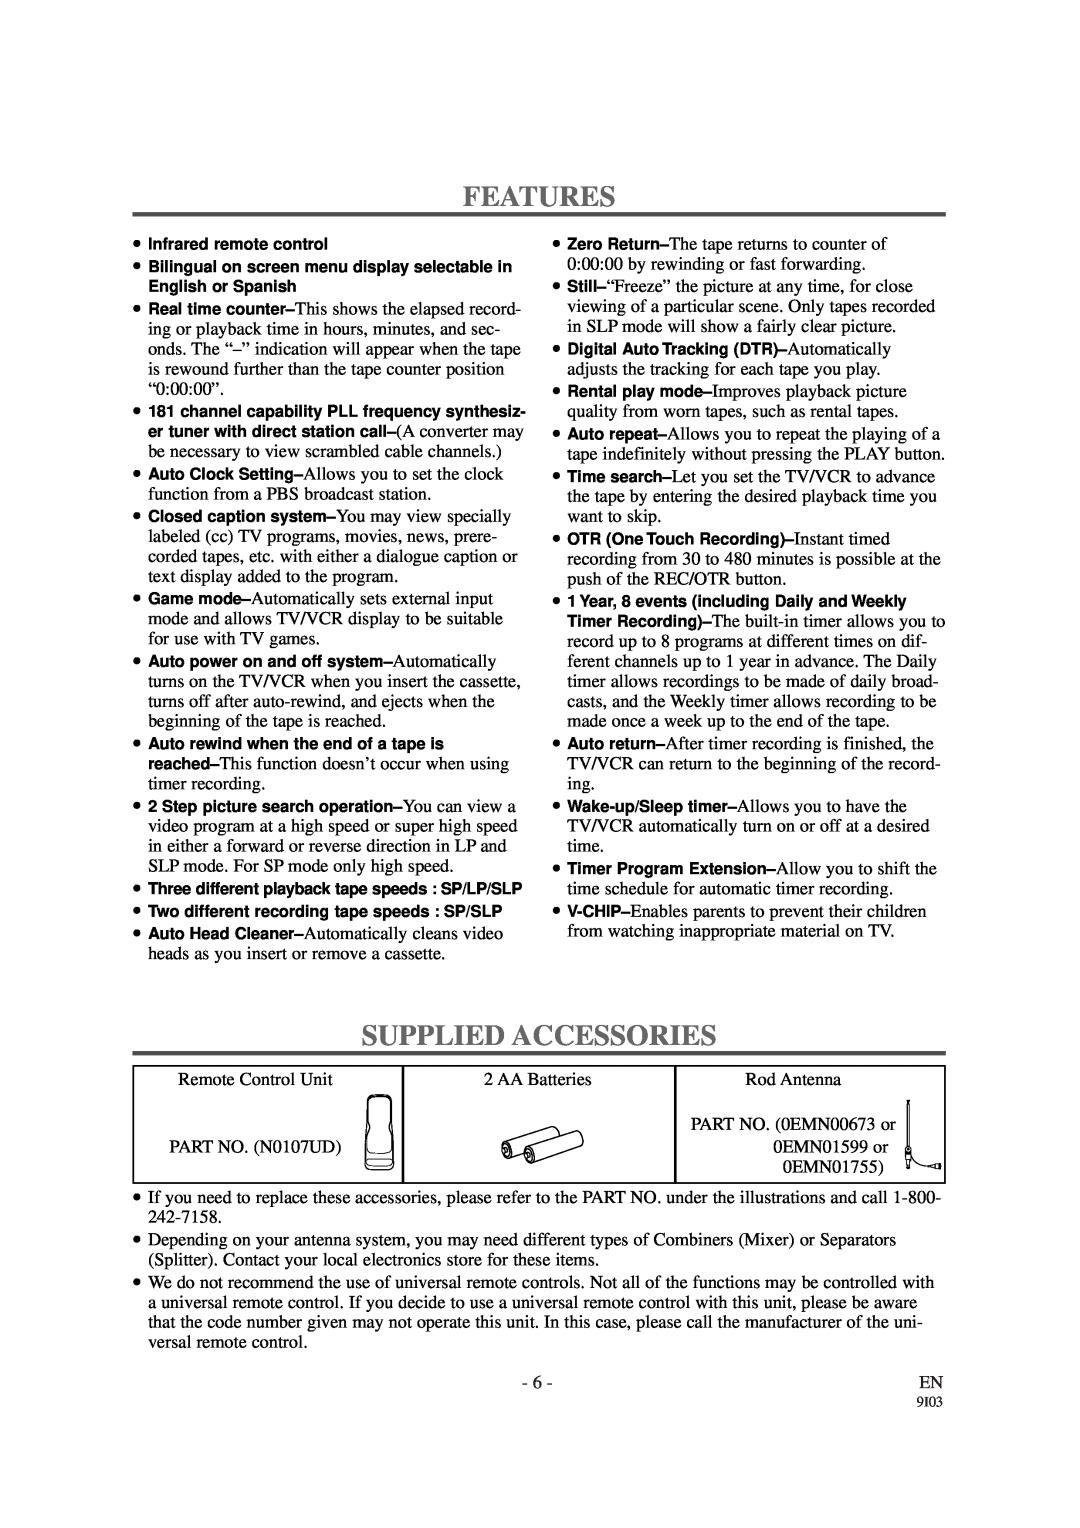 Symphonic WF-13C2 owner manual Features, Supplied Accessories 